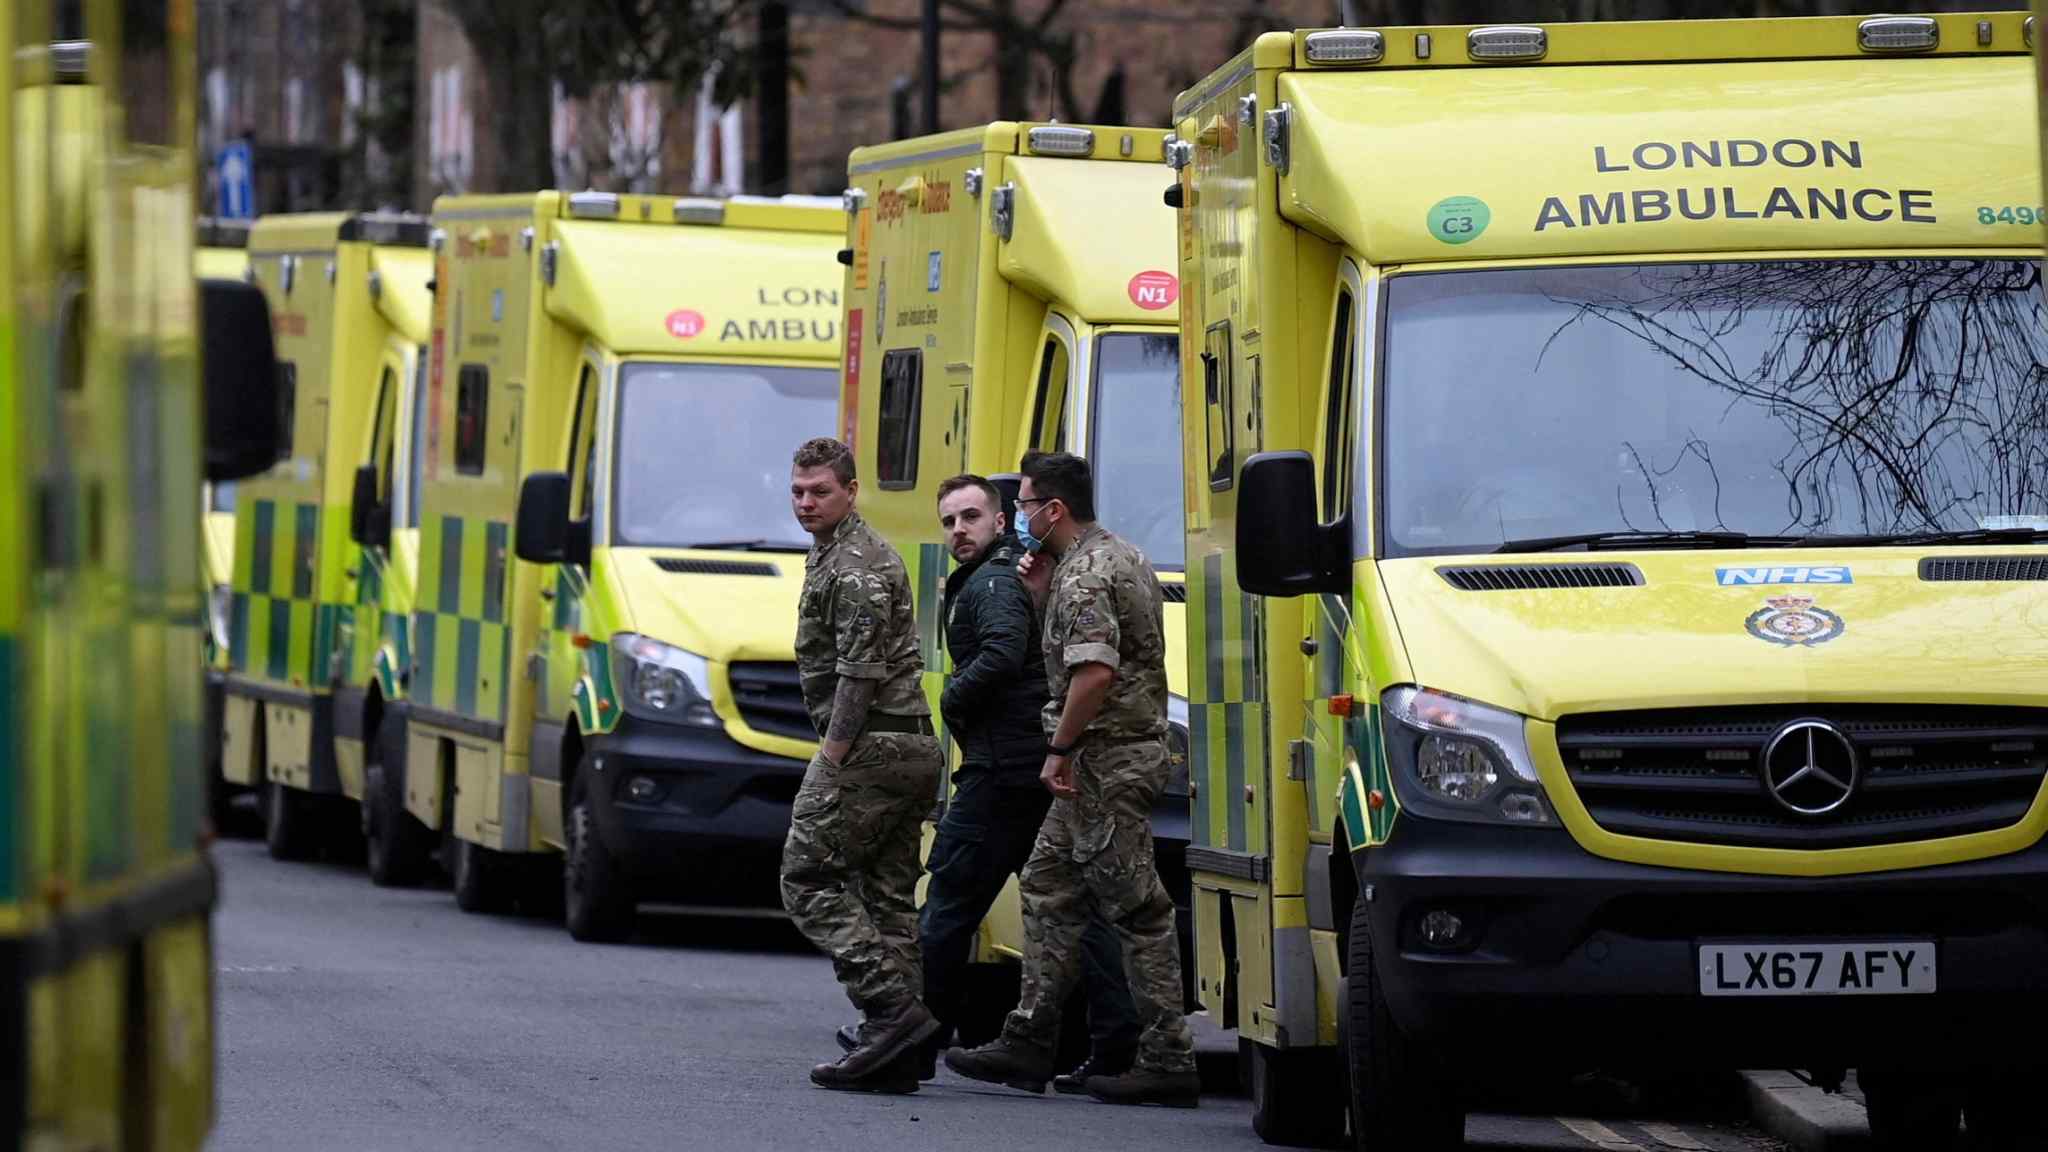 Sunak’s NHS crisis plan to provide more ambulances, hospital beds and care at home